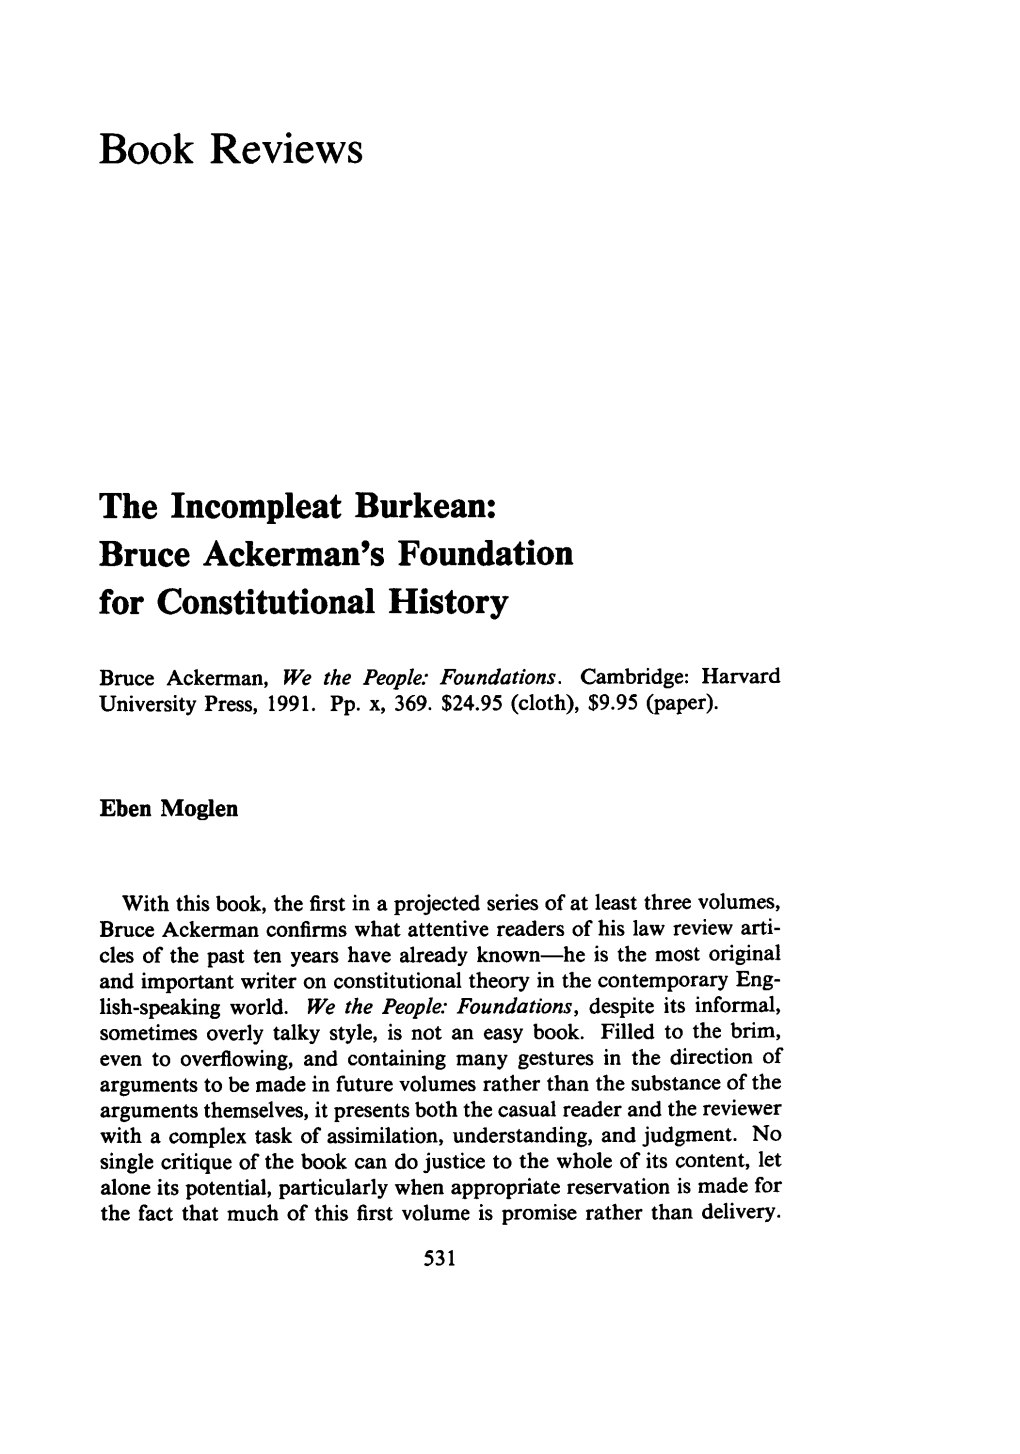 Bruce Ackerman's Foundation for Constitutional History